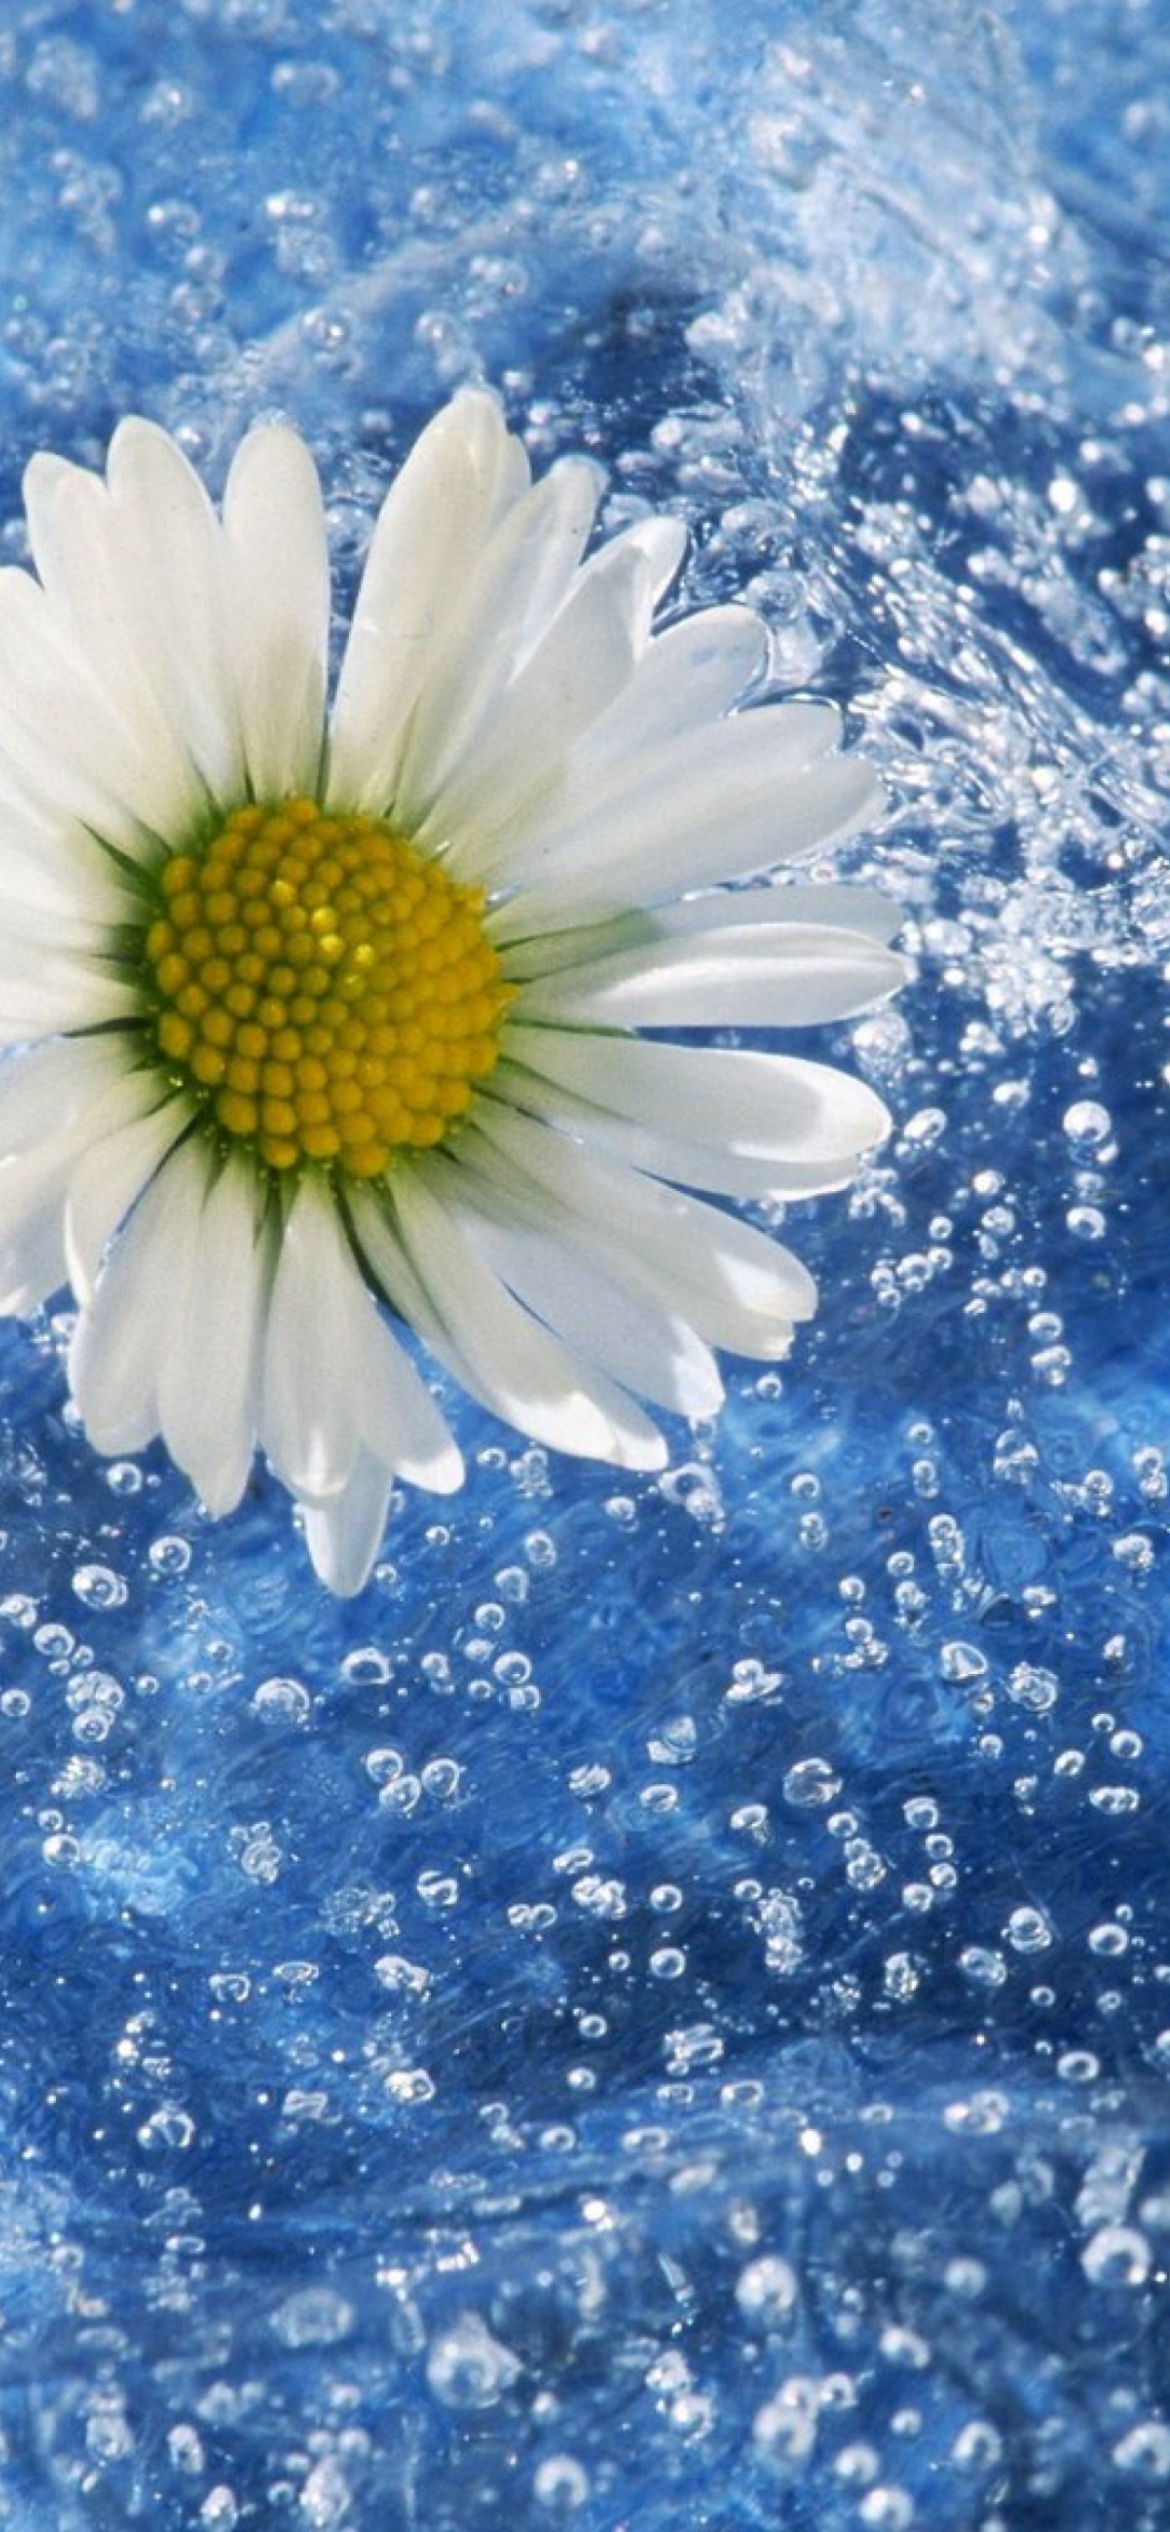 Chamomile And Water wallpaper 1170x2532